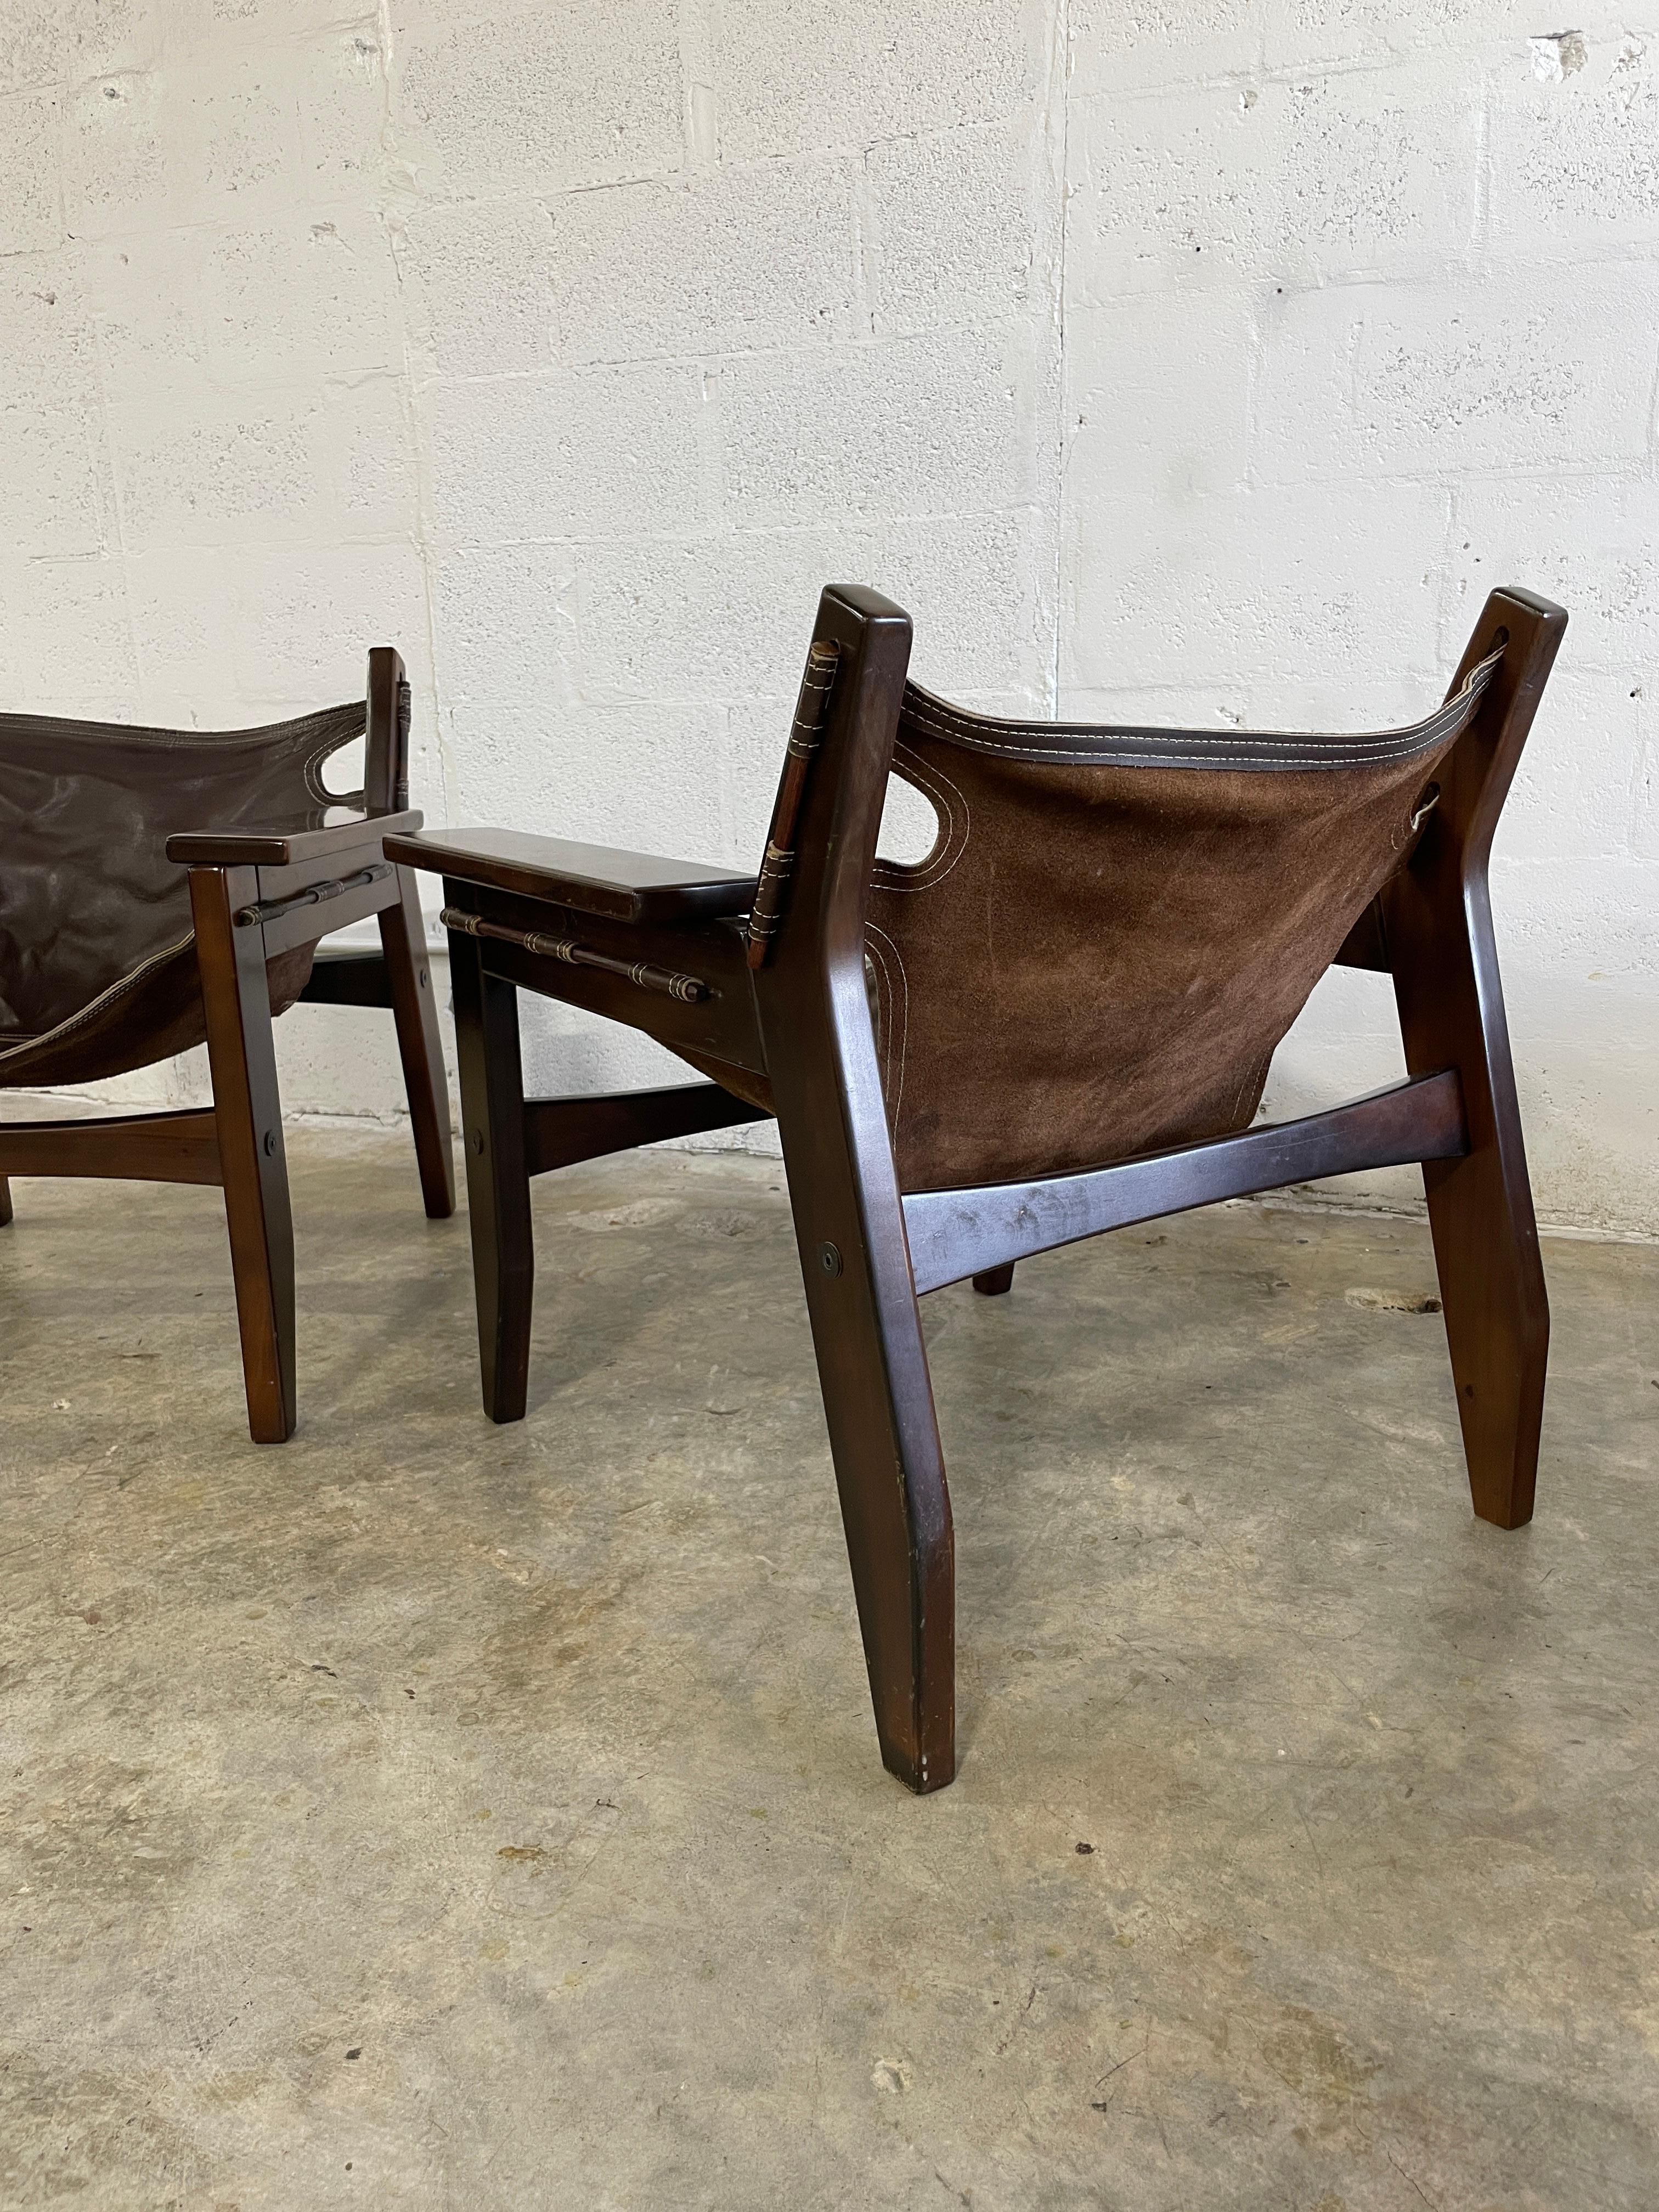 Mid-20th Century Sergio Rodrigues “Kilin” Chairs Brazilian Mid Century - a Pair For Sale